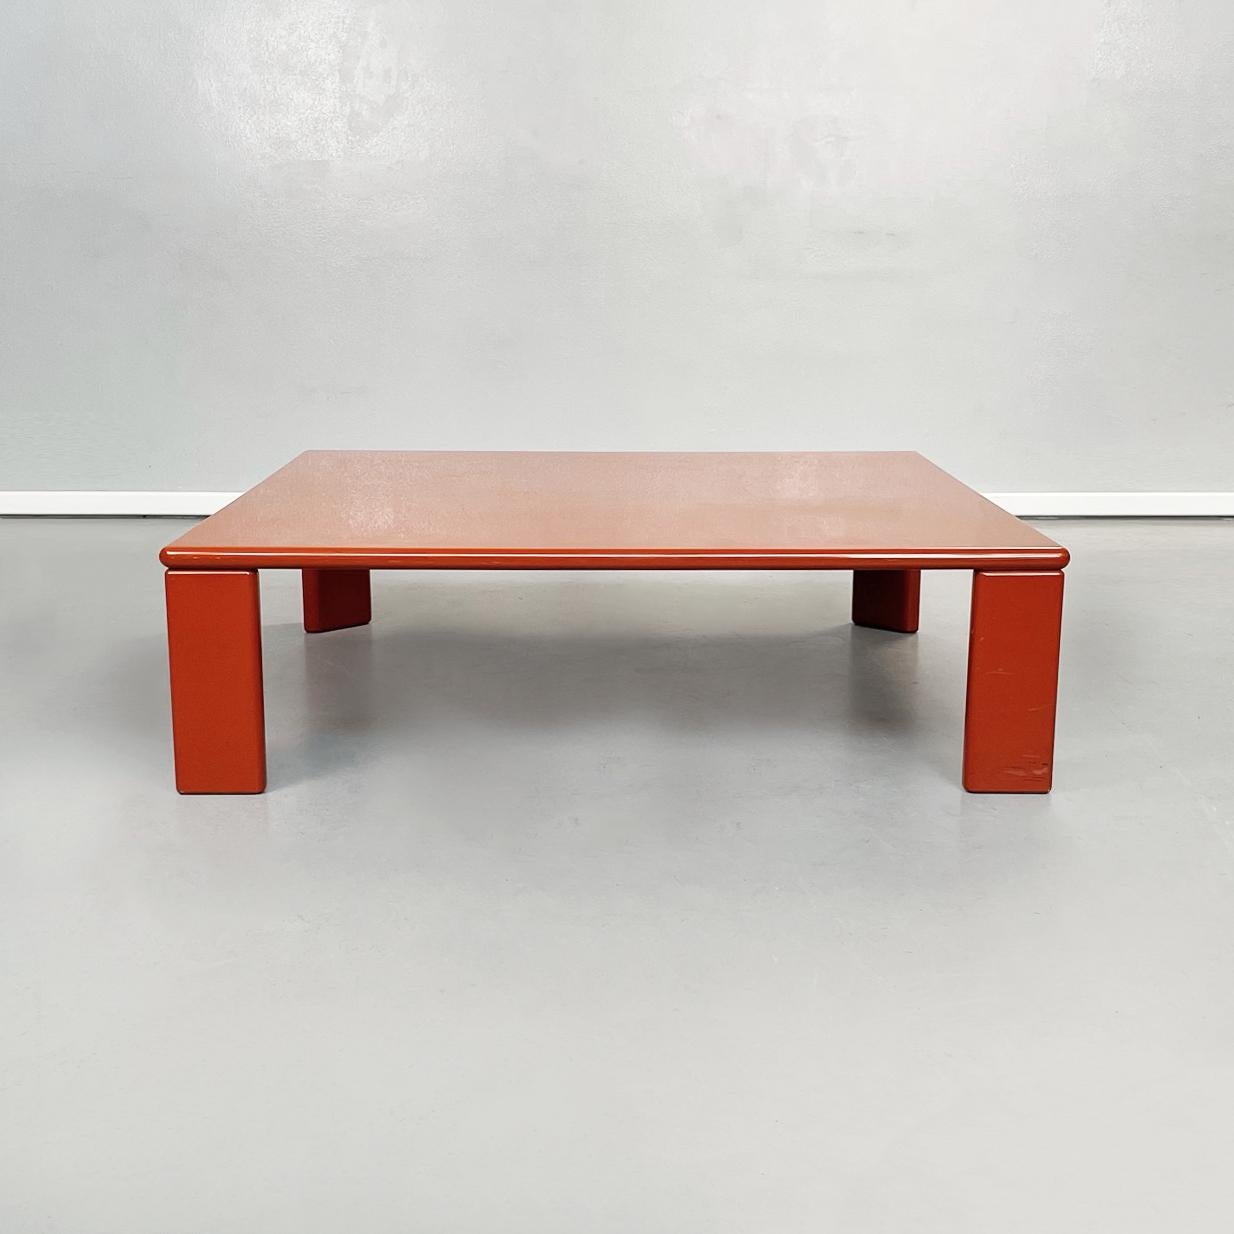 Italian mid-century Red wooden coffee table Ming by Katzuhide Takahama for Gavina, 1970s
Square coffee table model Ming in red lacquered wood. The 4 legs are triangular in shape with rounded corners.
This big coffee table can be the center of a